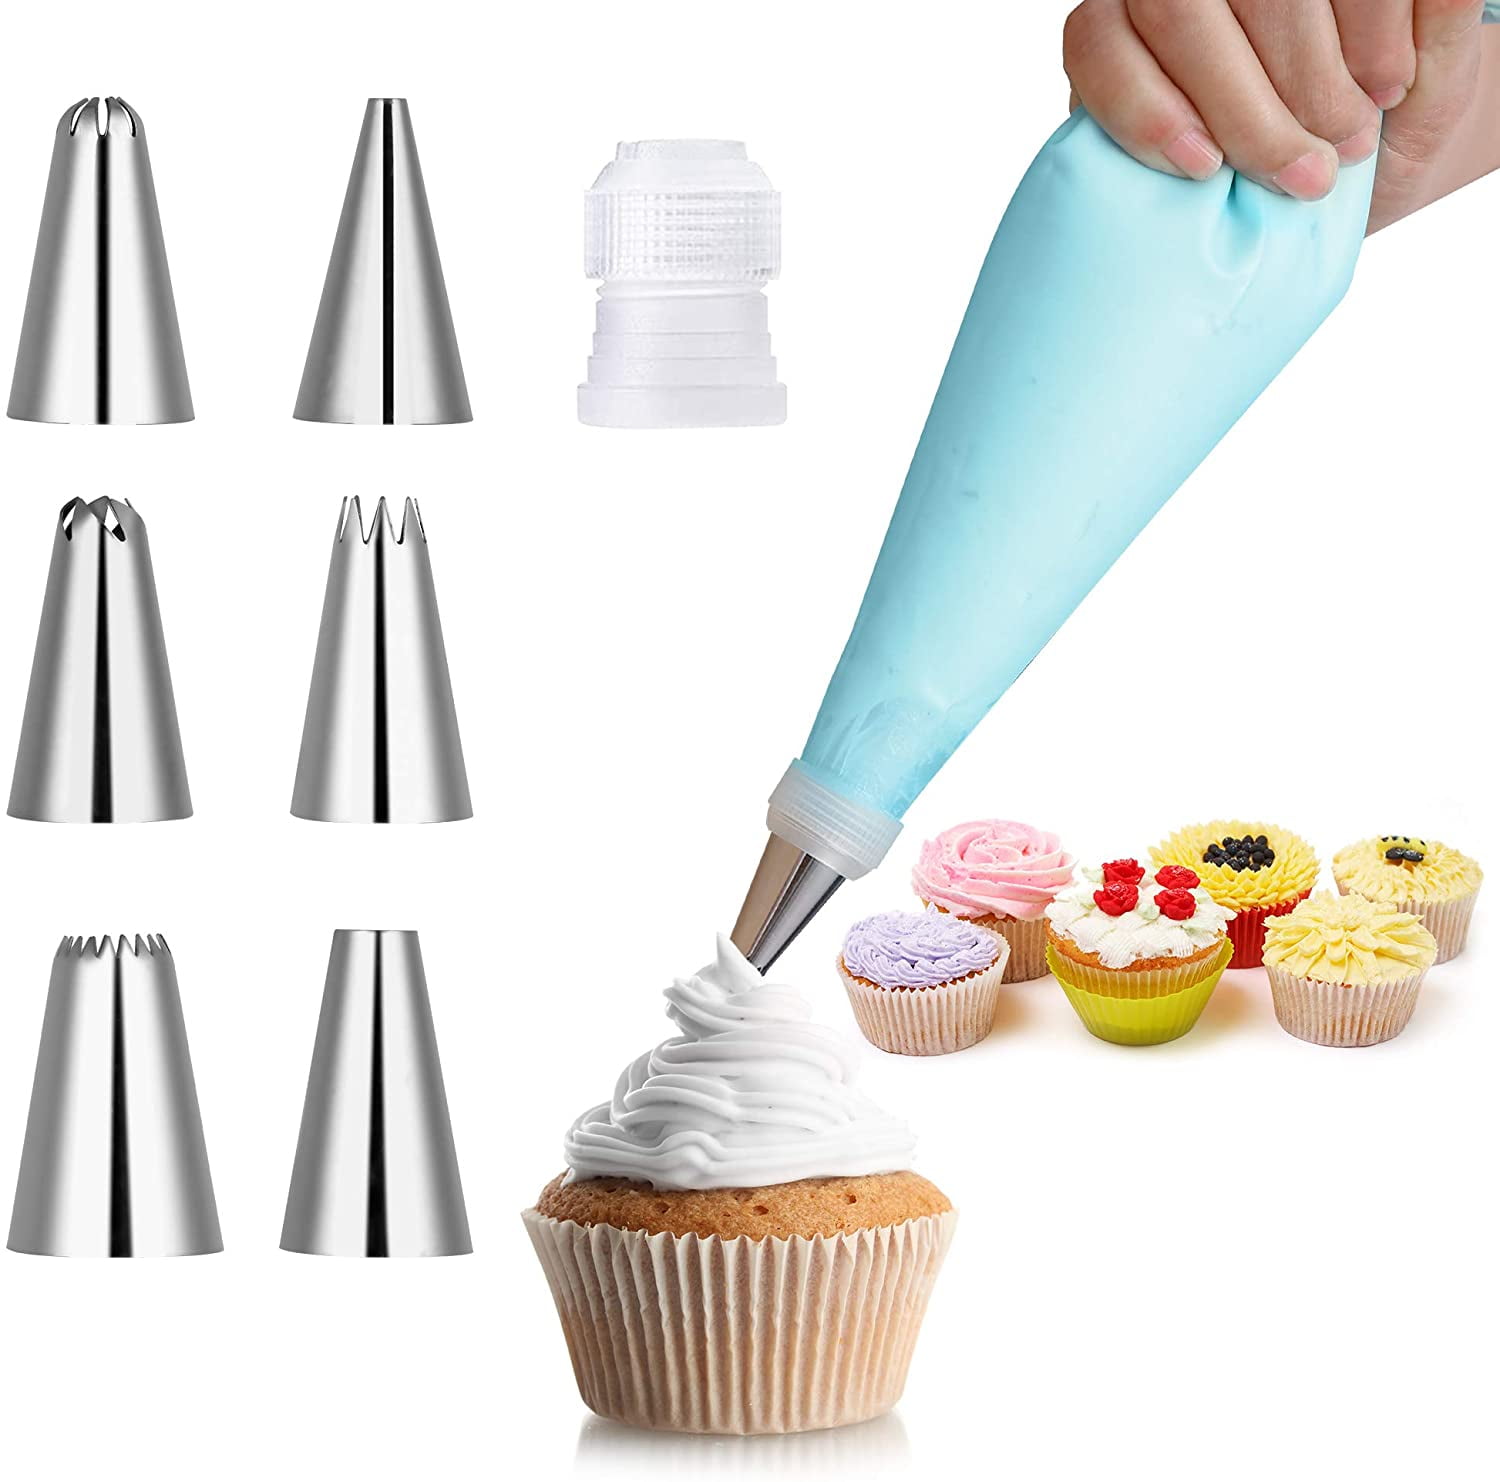 Cake Pastry Tip Frosting Tube Icing Baking Decorating Pipping Nozzle Tip Set Kit 